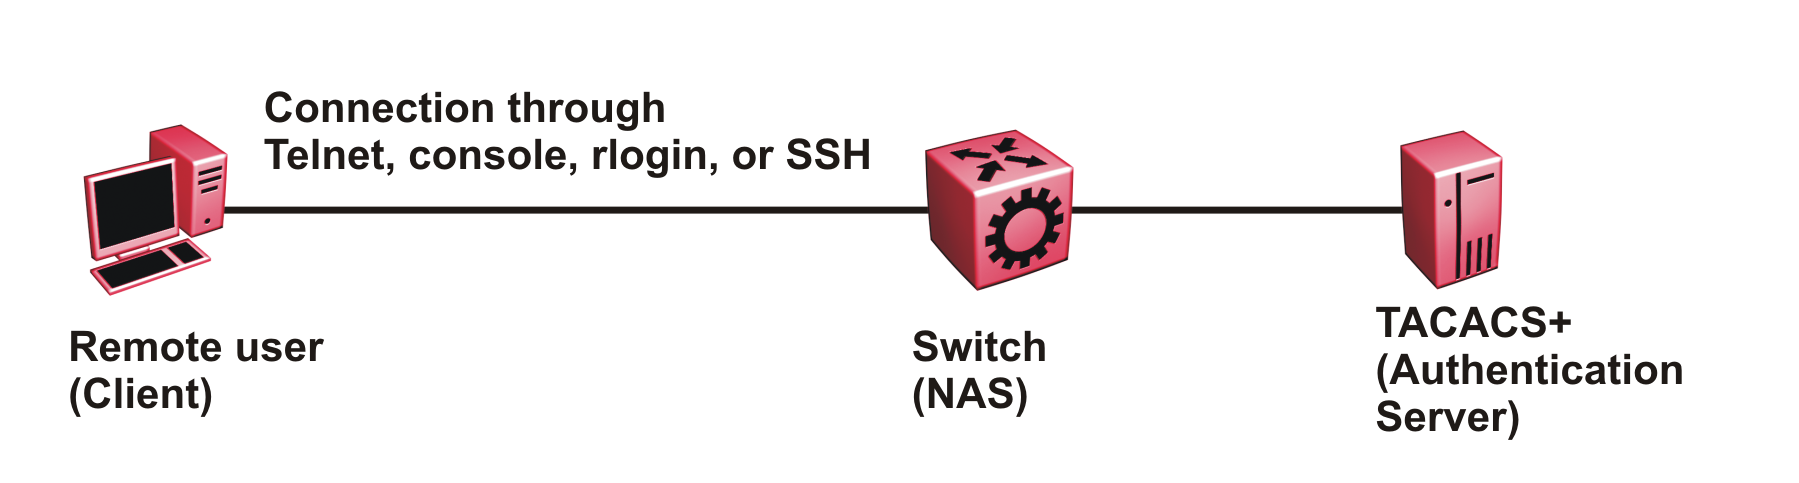 A remote user connects to a TACACS+ authentication server through a NAS.